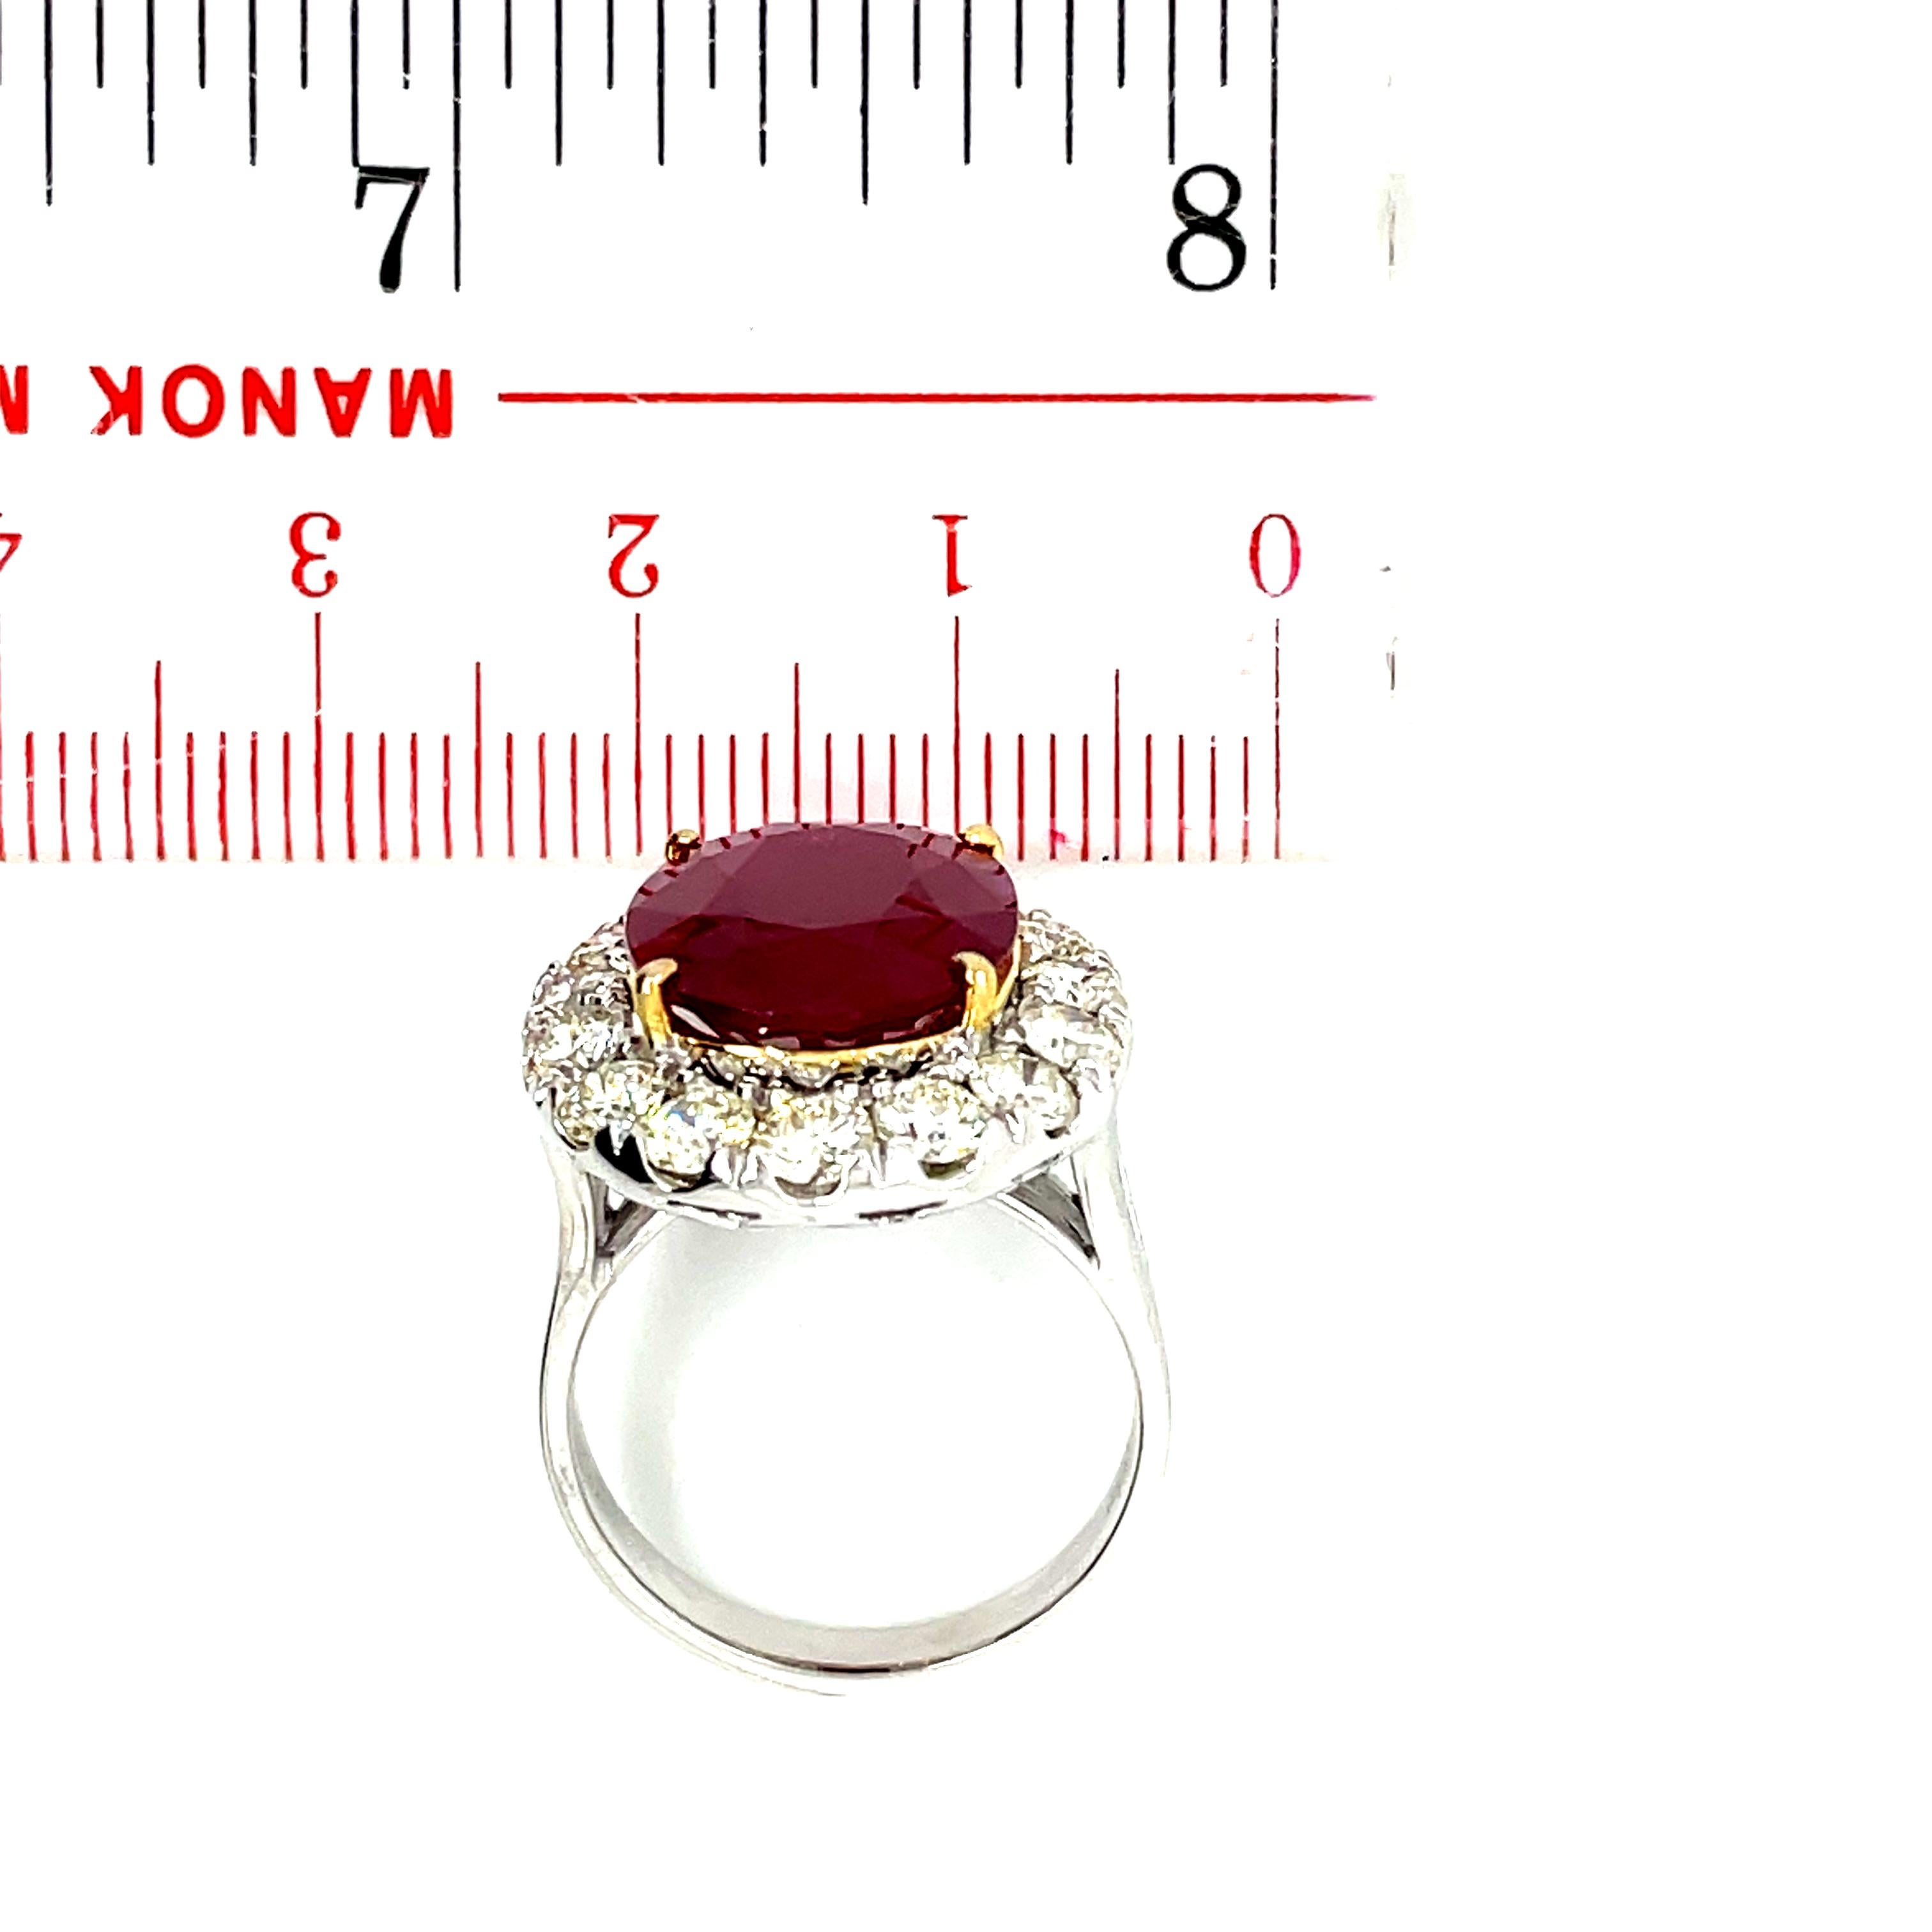 Burma (Myanmar) Ruby Cts 8.45 and Diamond Engagement Ring with GRS Certificate For Sale 3